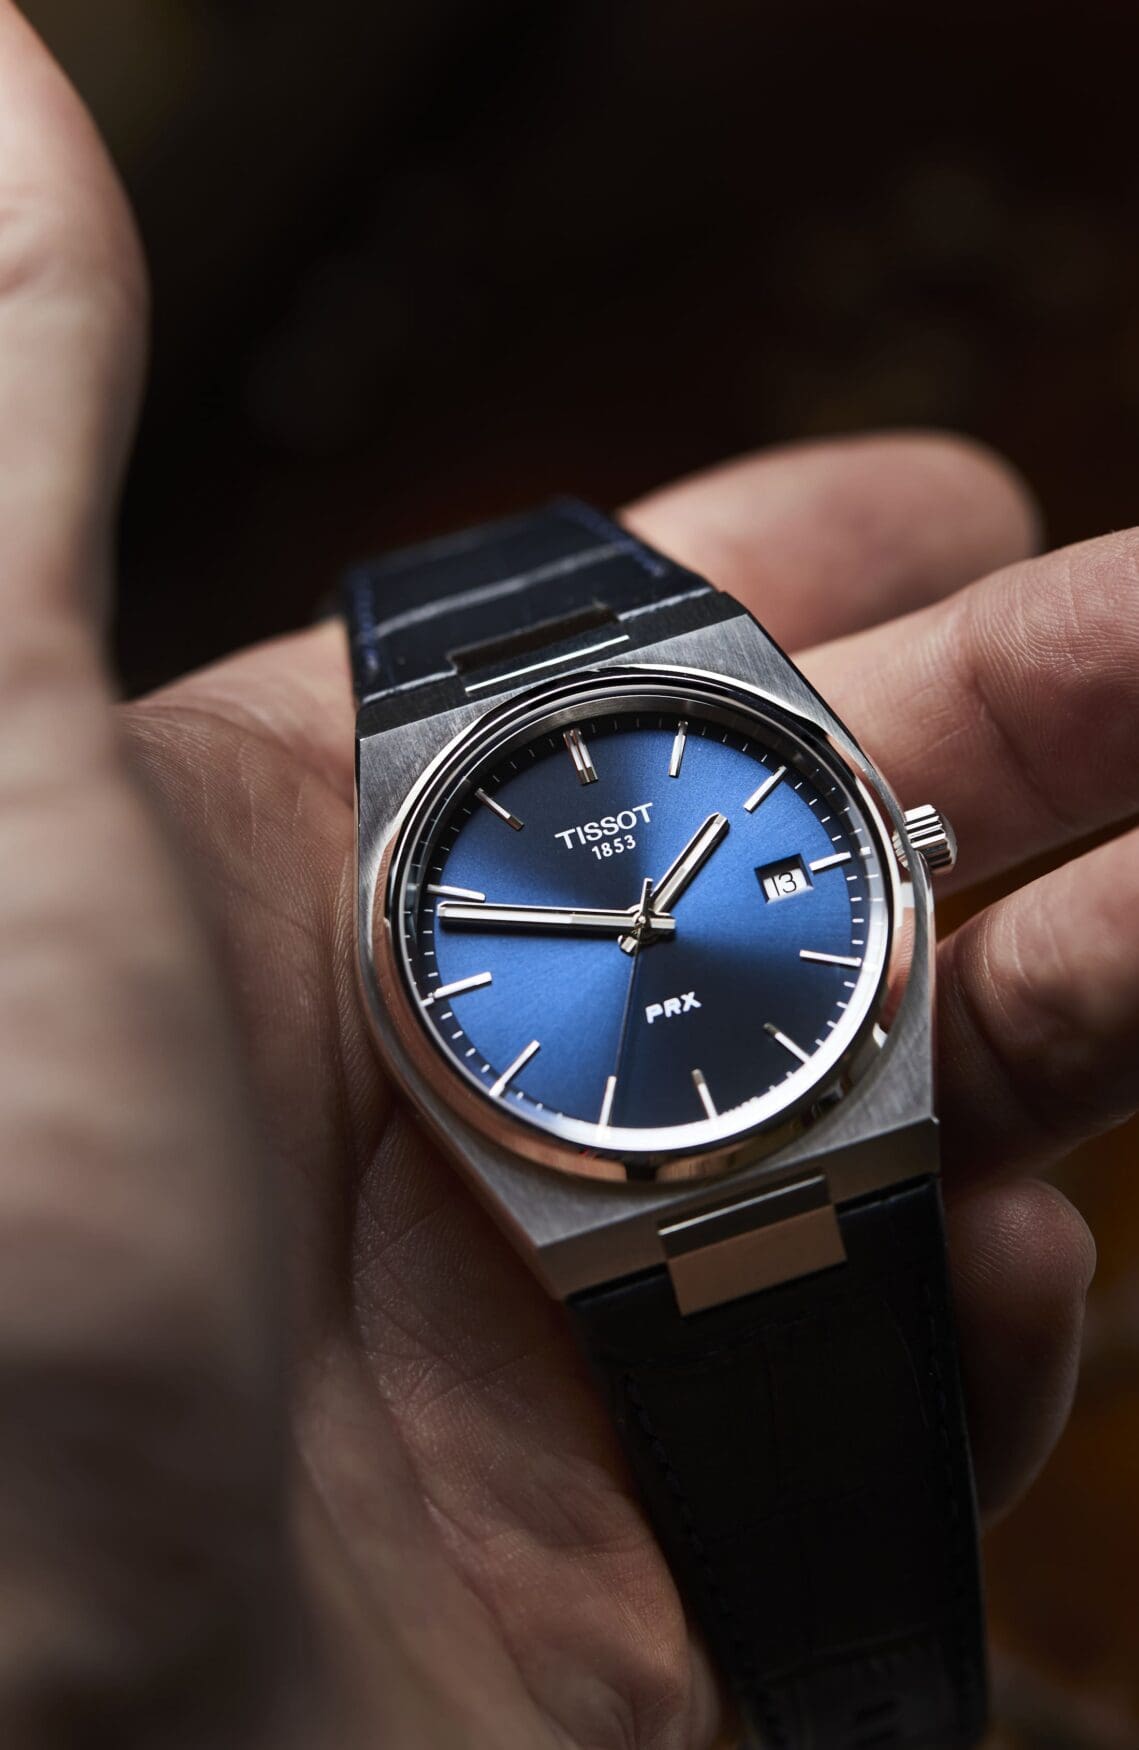 VIDEO: The Tissot PRX receives a long-awaited leather strap option